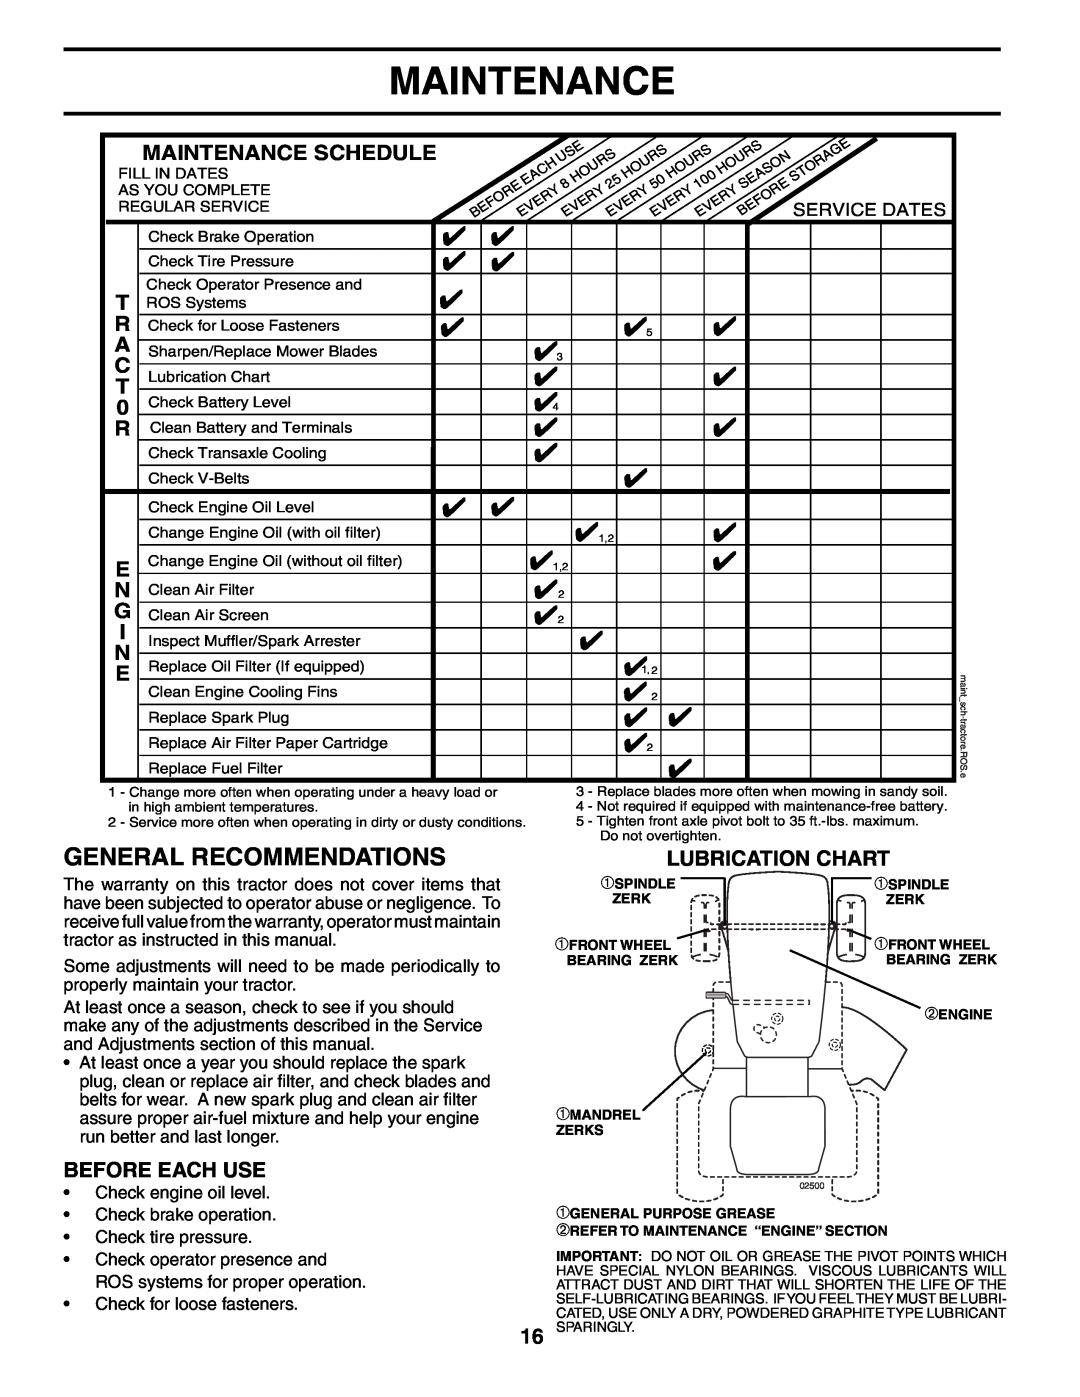 Poulan XT24H48YT manual General Recommendations, Lubrication Chart, Before Each Use, Maintenance Schedule 